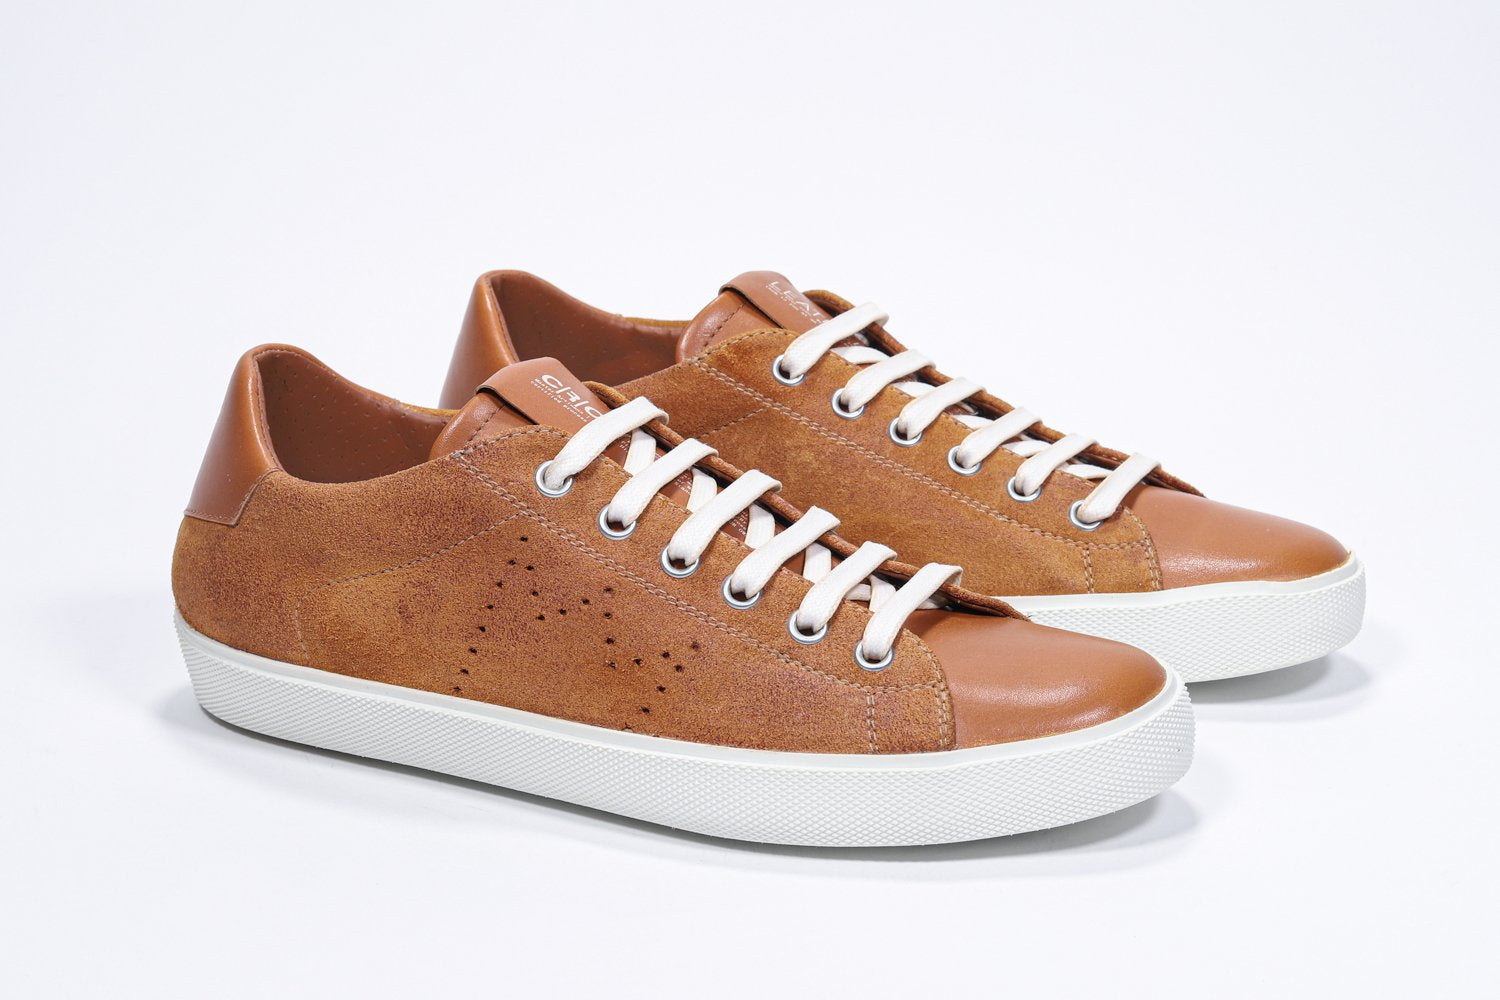 Three quarter front view of low top sneaker with perforated crown logo on upper. Full rust suede upper and white rubber sole.